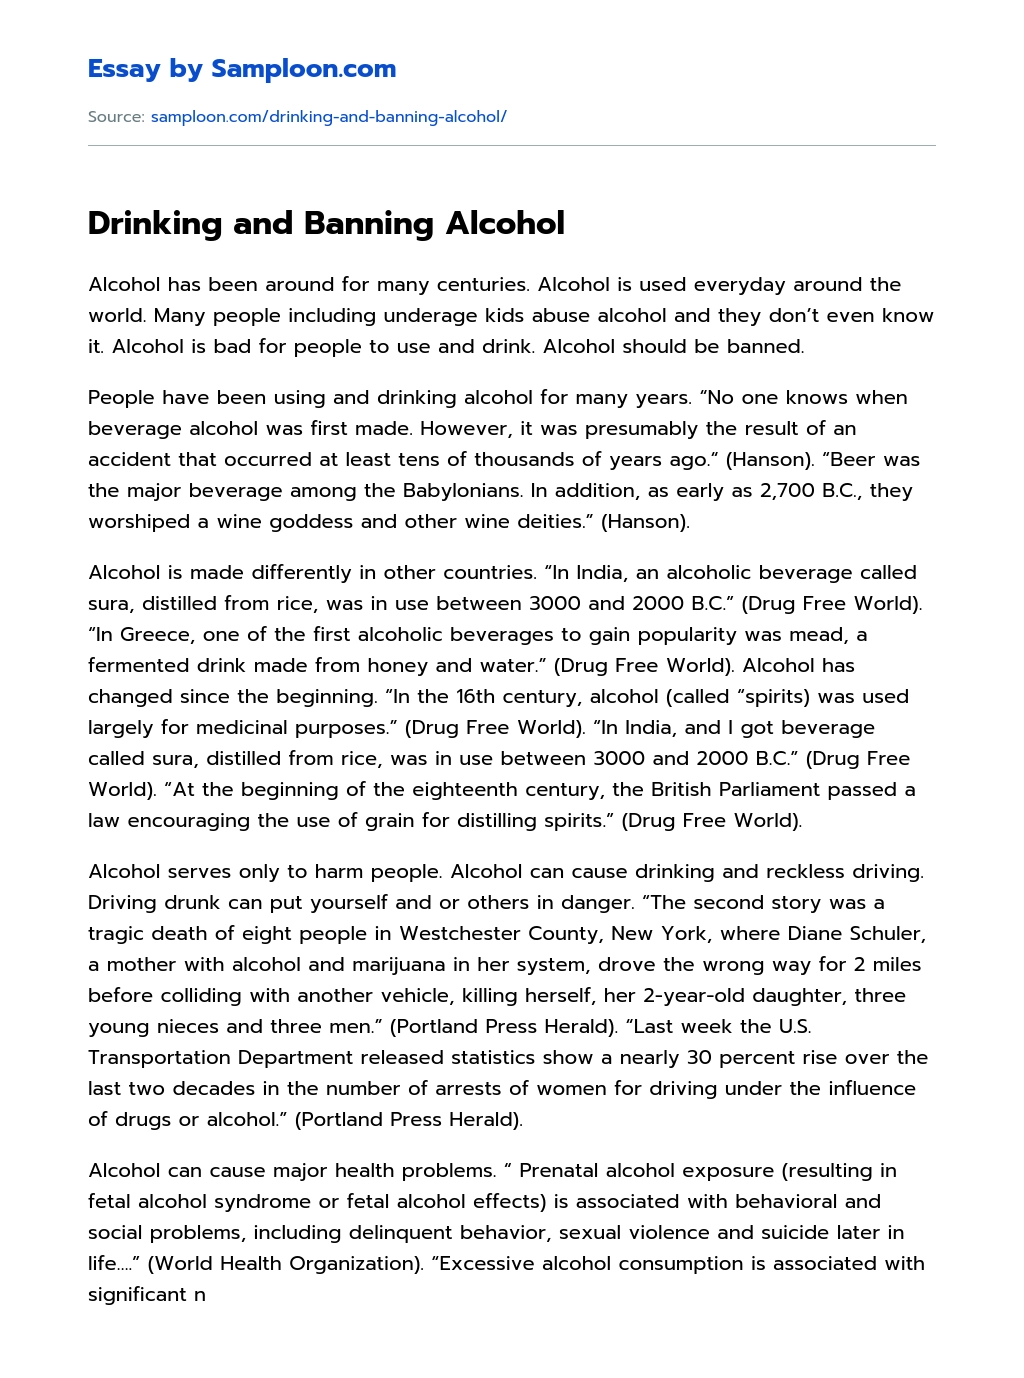 Drinking and Banning Alcohol essay